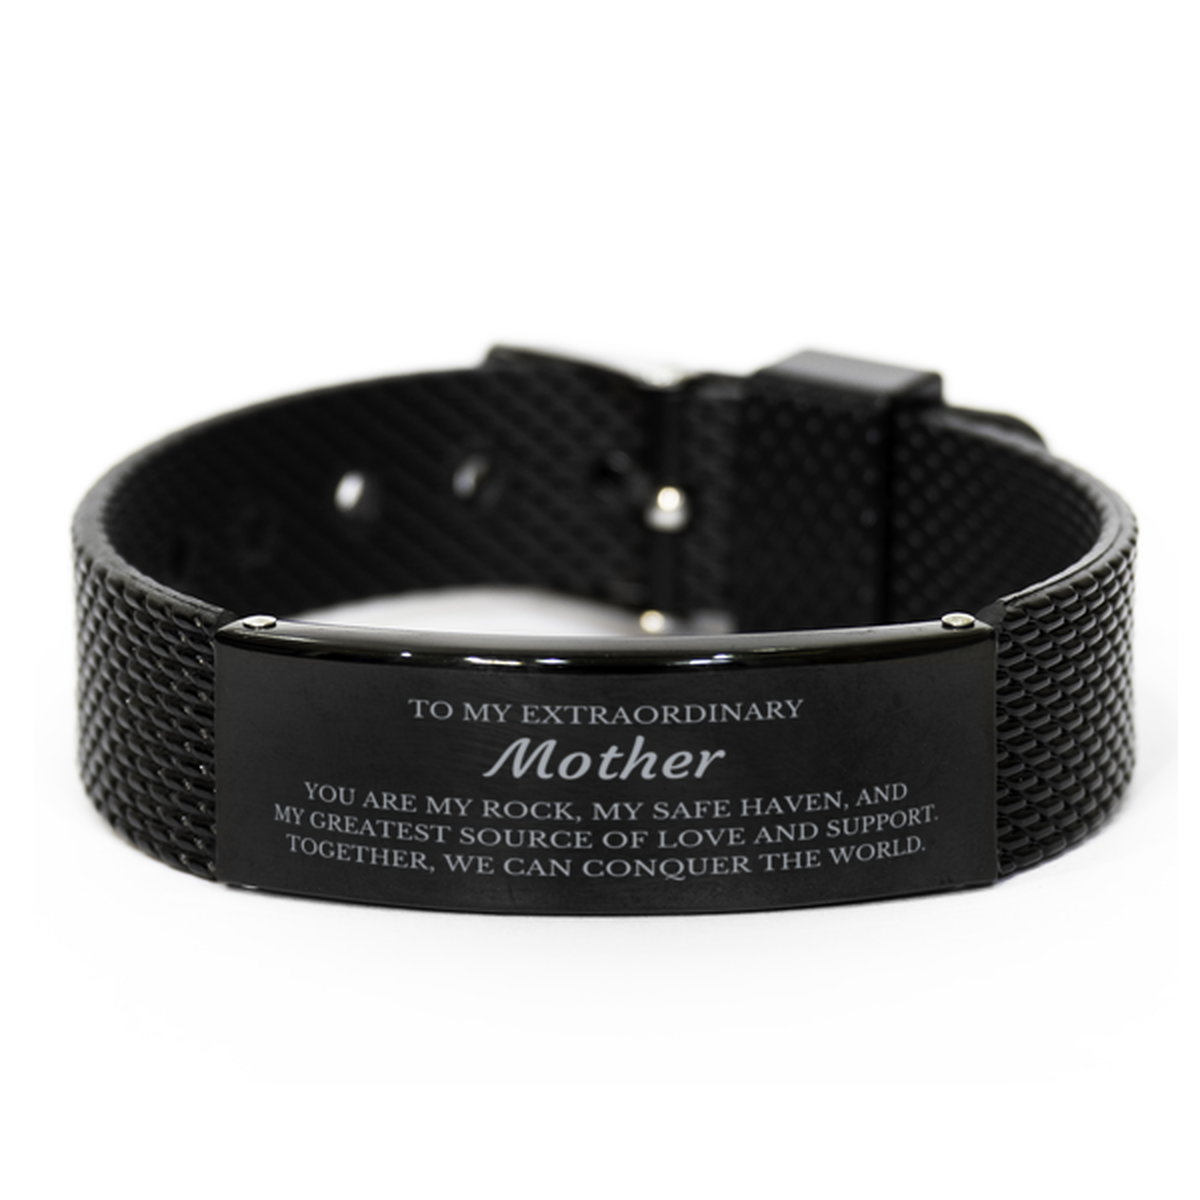 To My Extraordinary Mother Gifts, Together, we can conquer the world, Birthday Black Shark Mesh Bracelet For Mother, Christmas Gifts For Mother